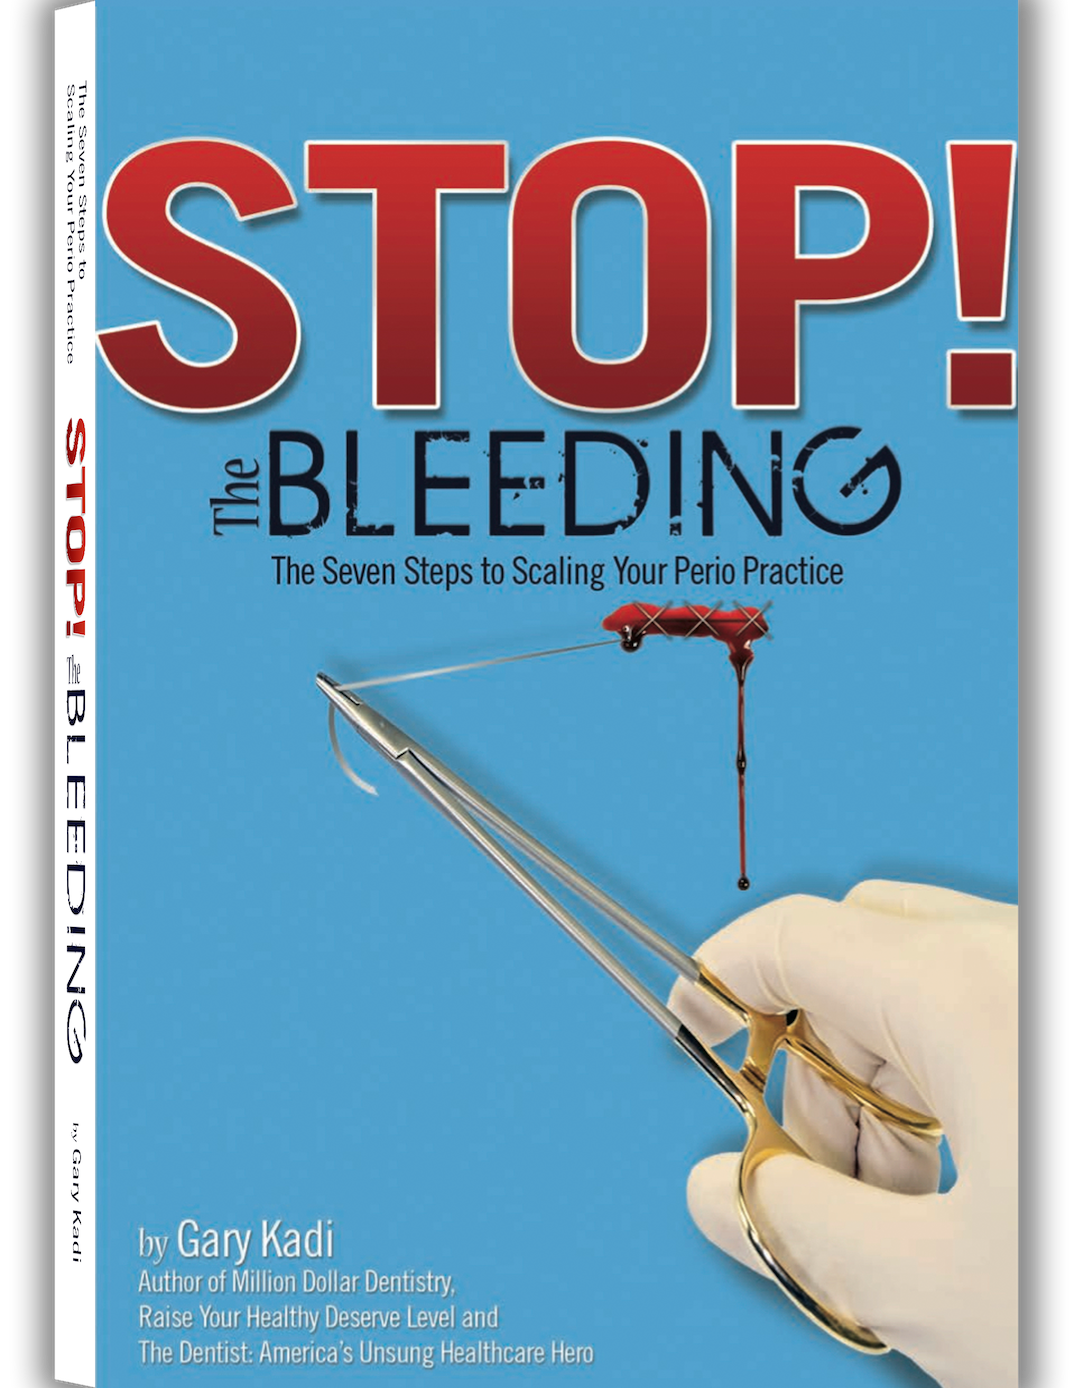 Stop The Bleeding An Insightful Guide For Periodontists 